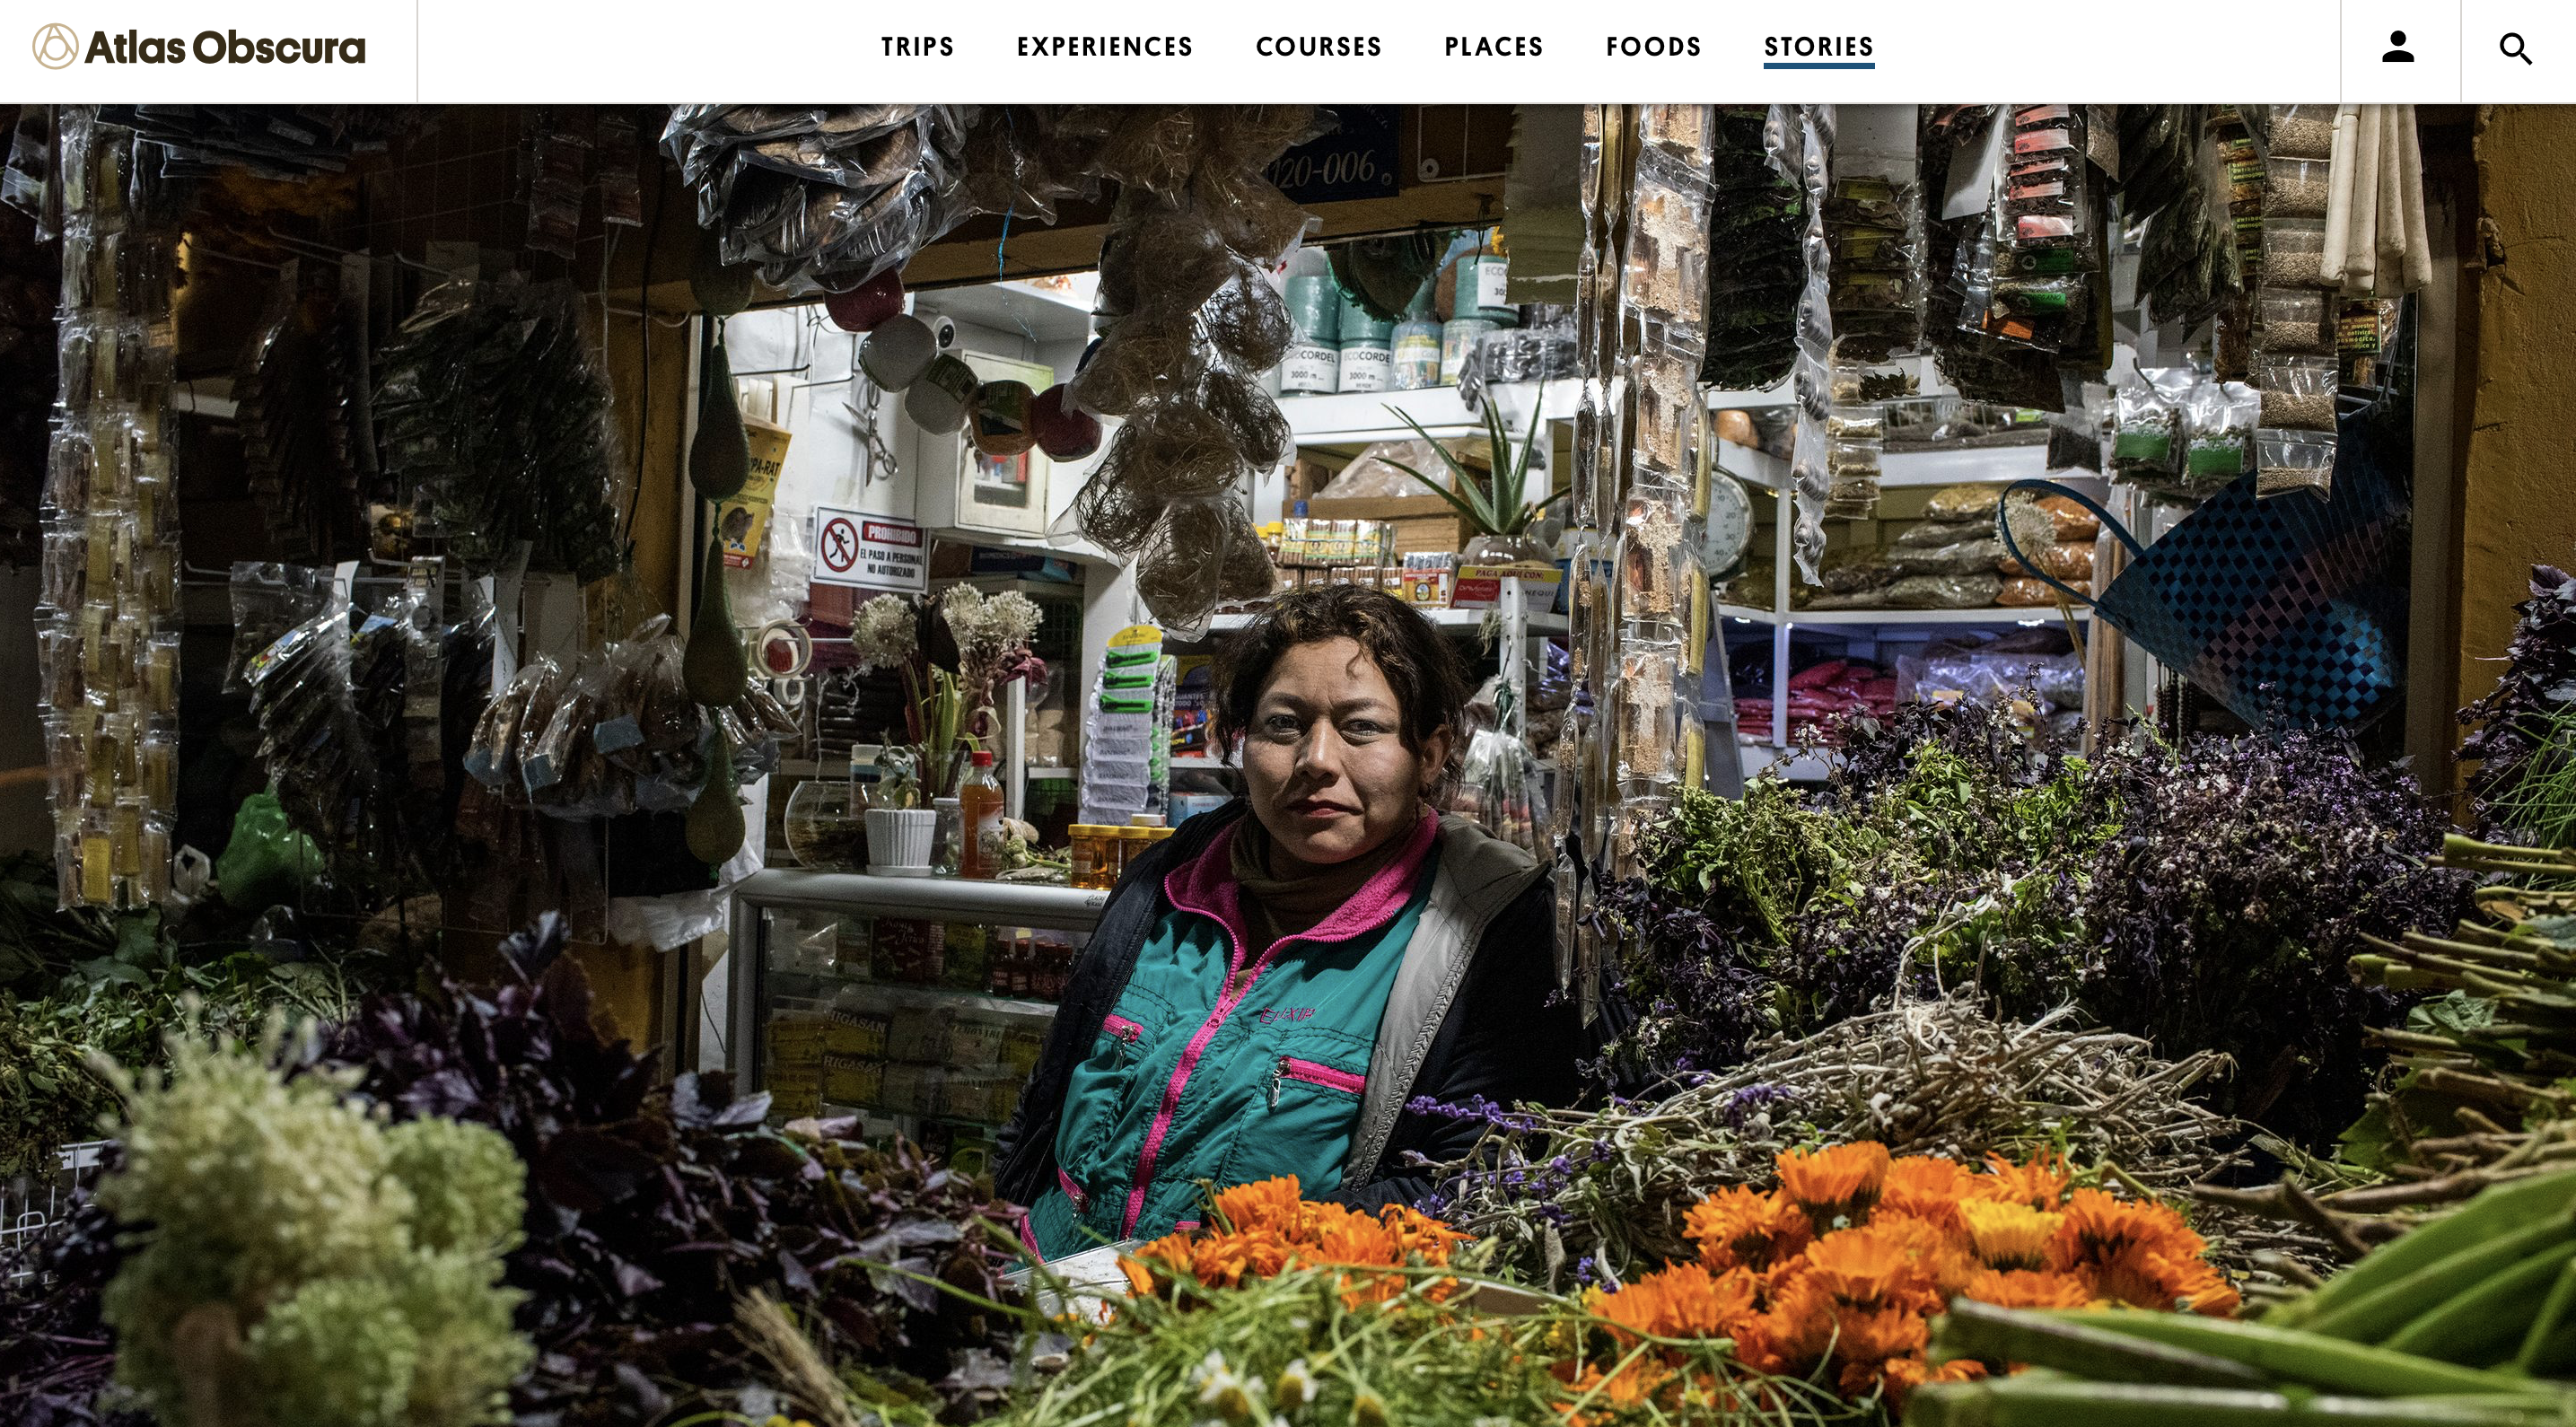 Atlas Oscura: This Bogotá Market Comes Alive Only at Night, Full of Ancient Plant Lore and Astonishing Biodiversity